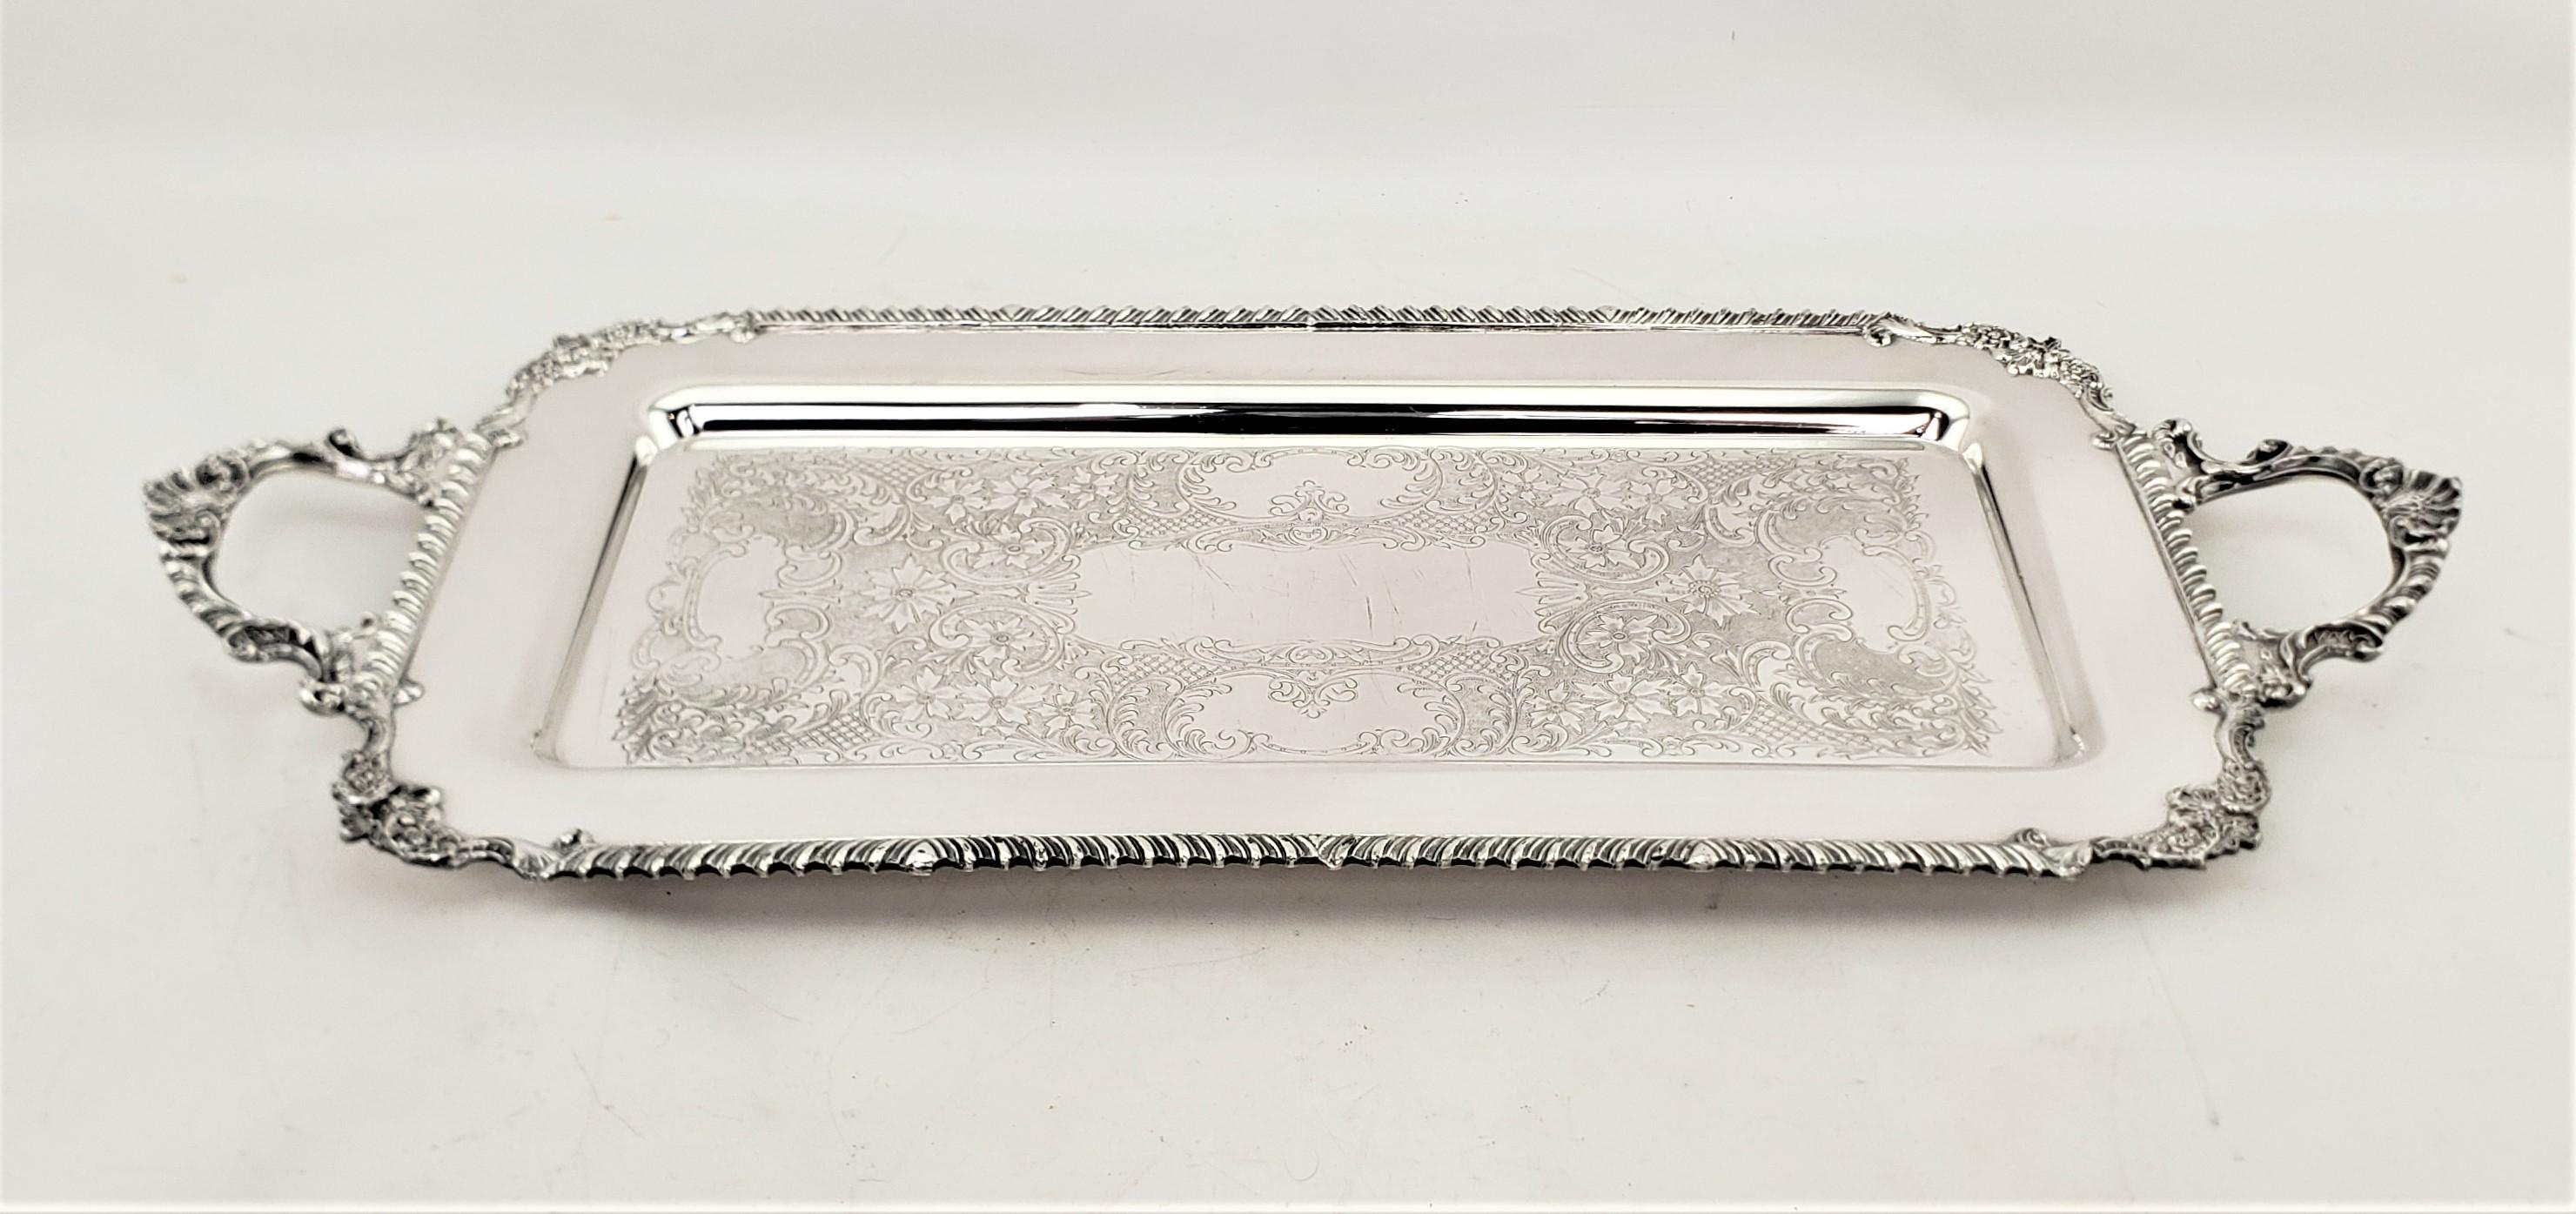 This narrowly constructed antique silver plated serving tray was made by the Old English Reproduction firm of England in approximately 1920 in a Victorian style. The tray is done with a stylized rope surround with accenting handles with scrollwork.